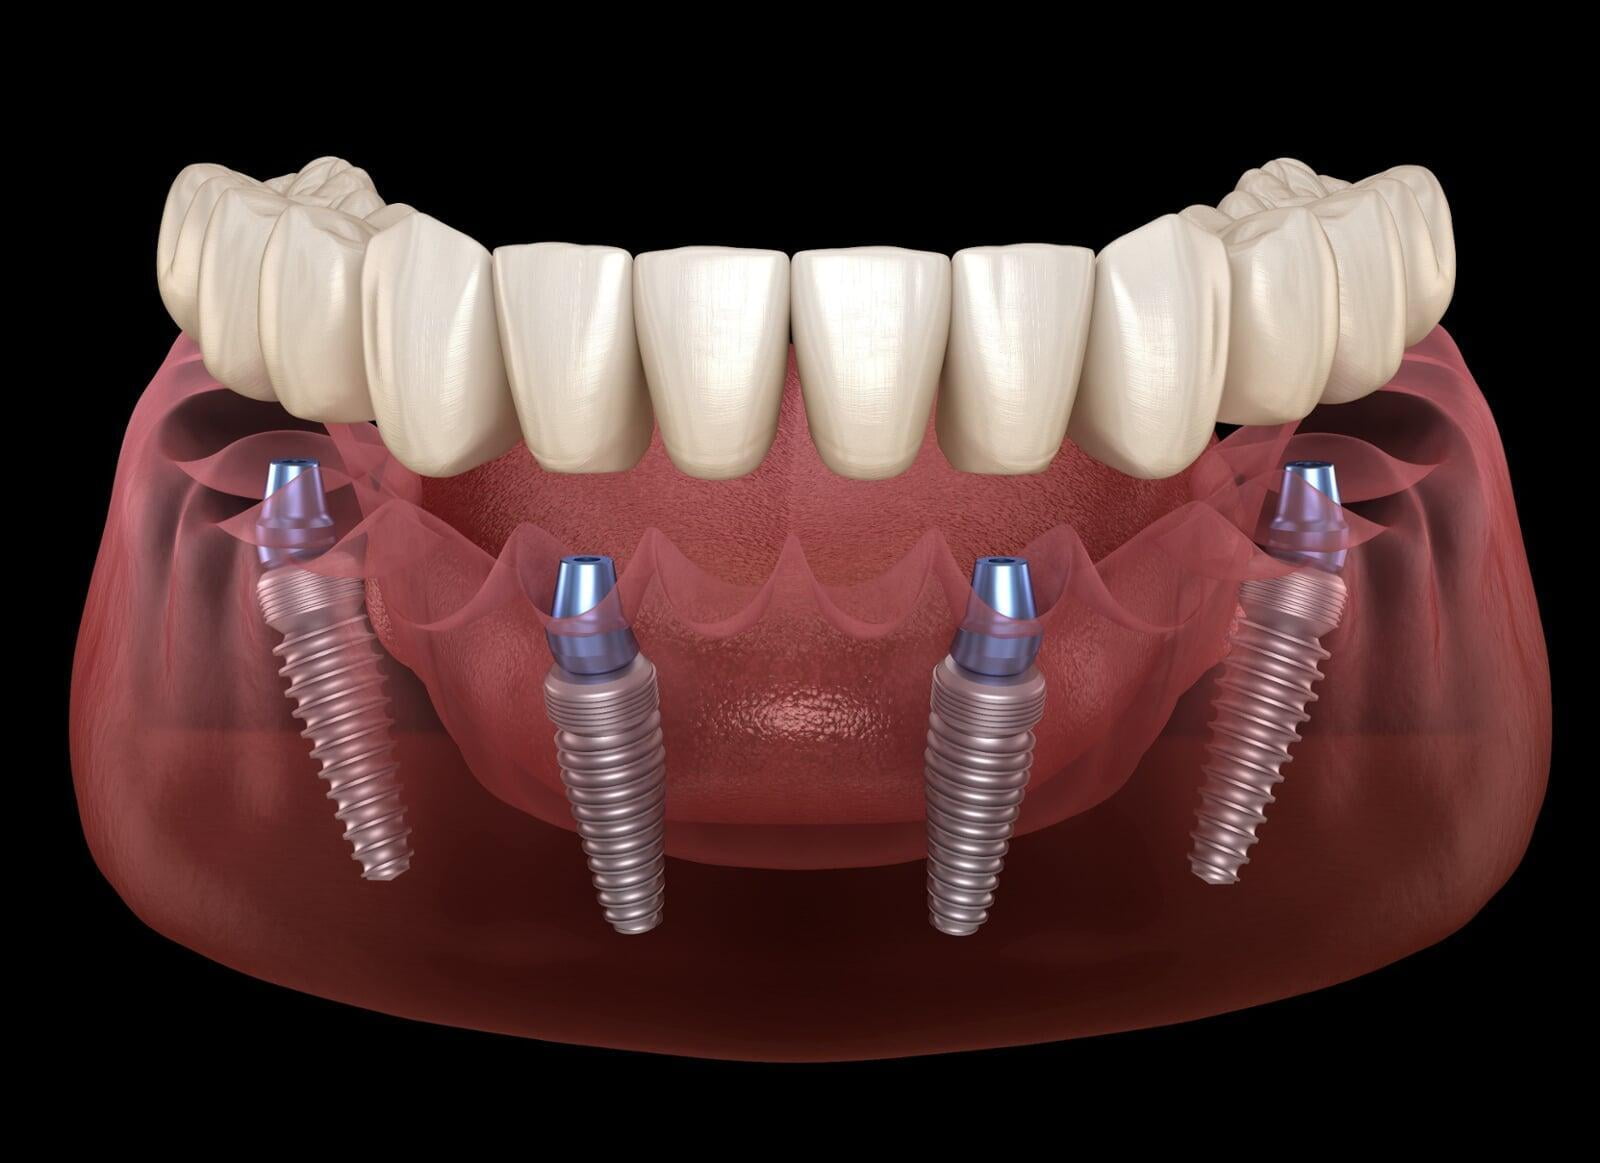 All-on-4 Dental Treatment Concept - The Latest Advancements in Dental Restoration